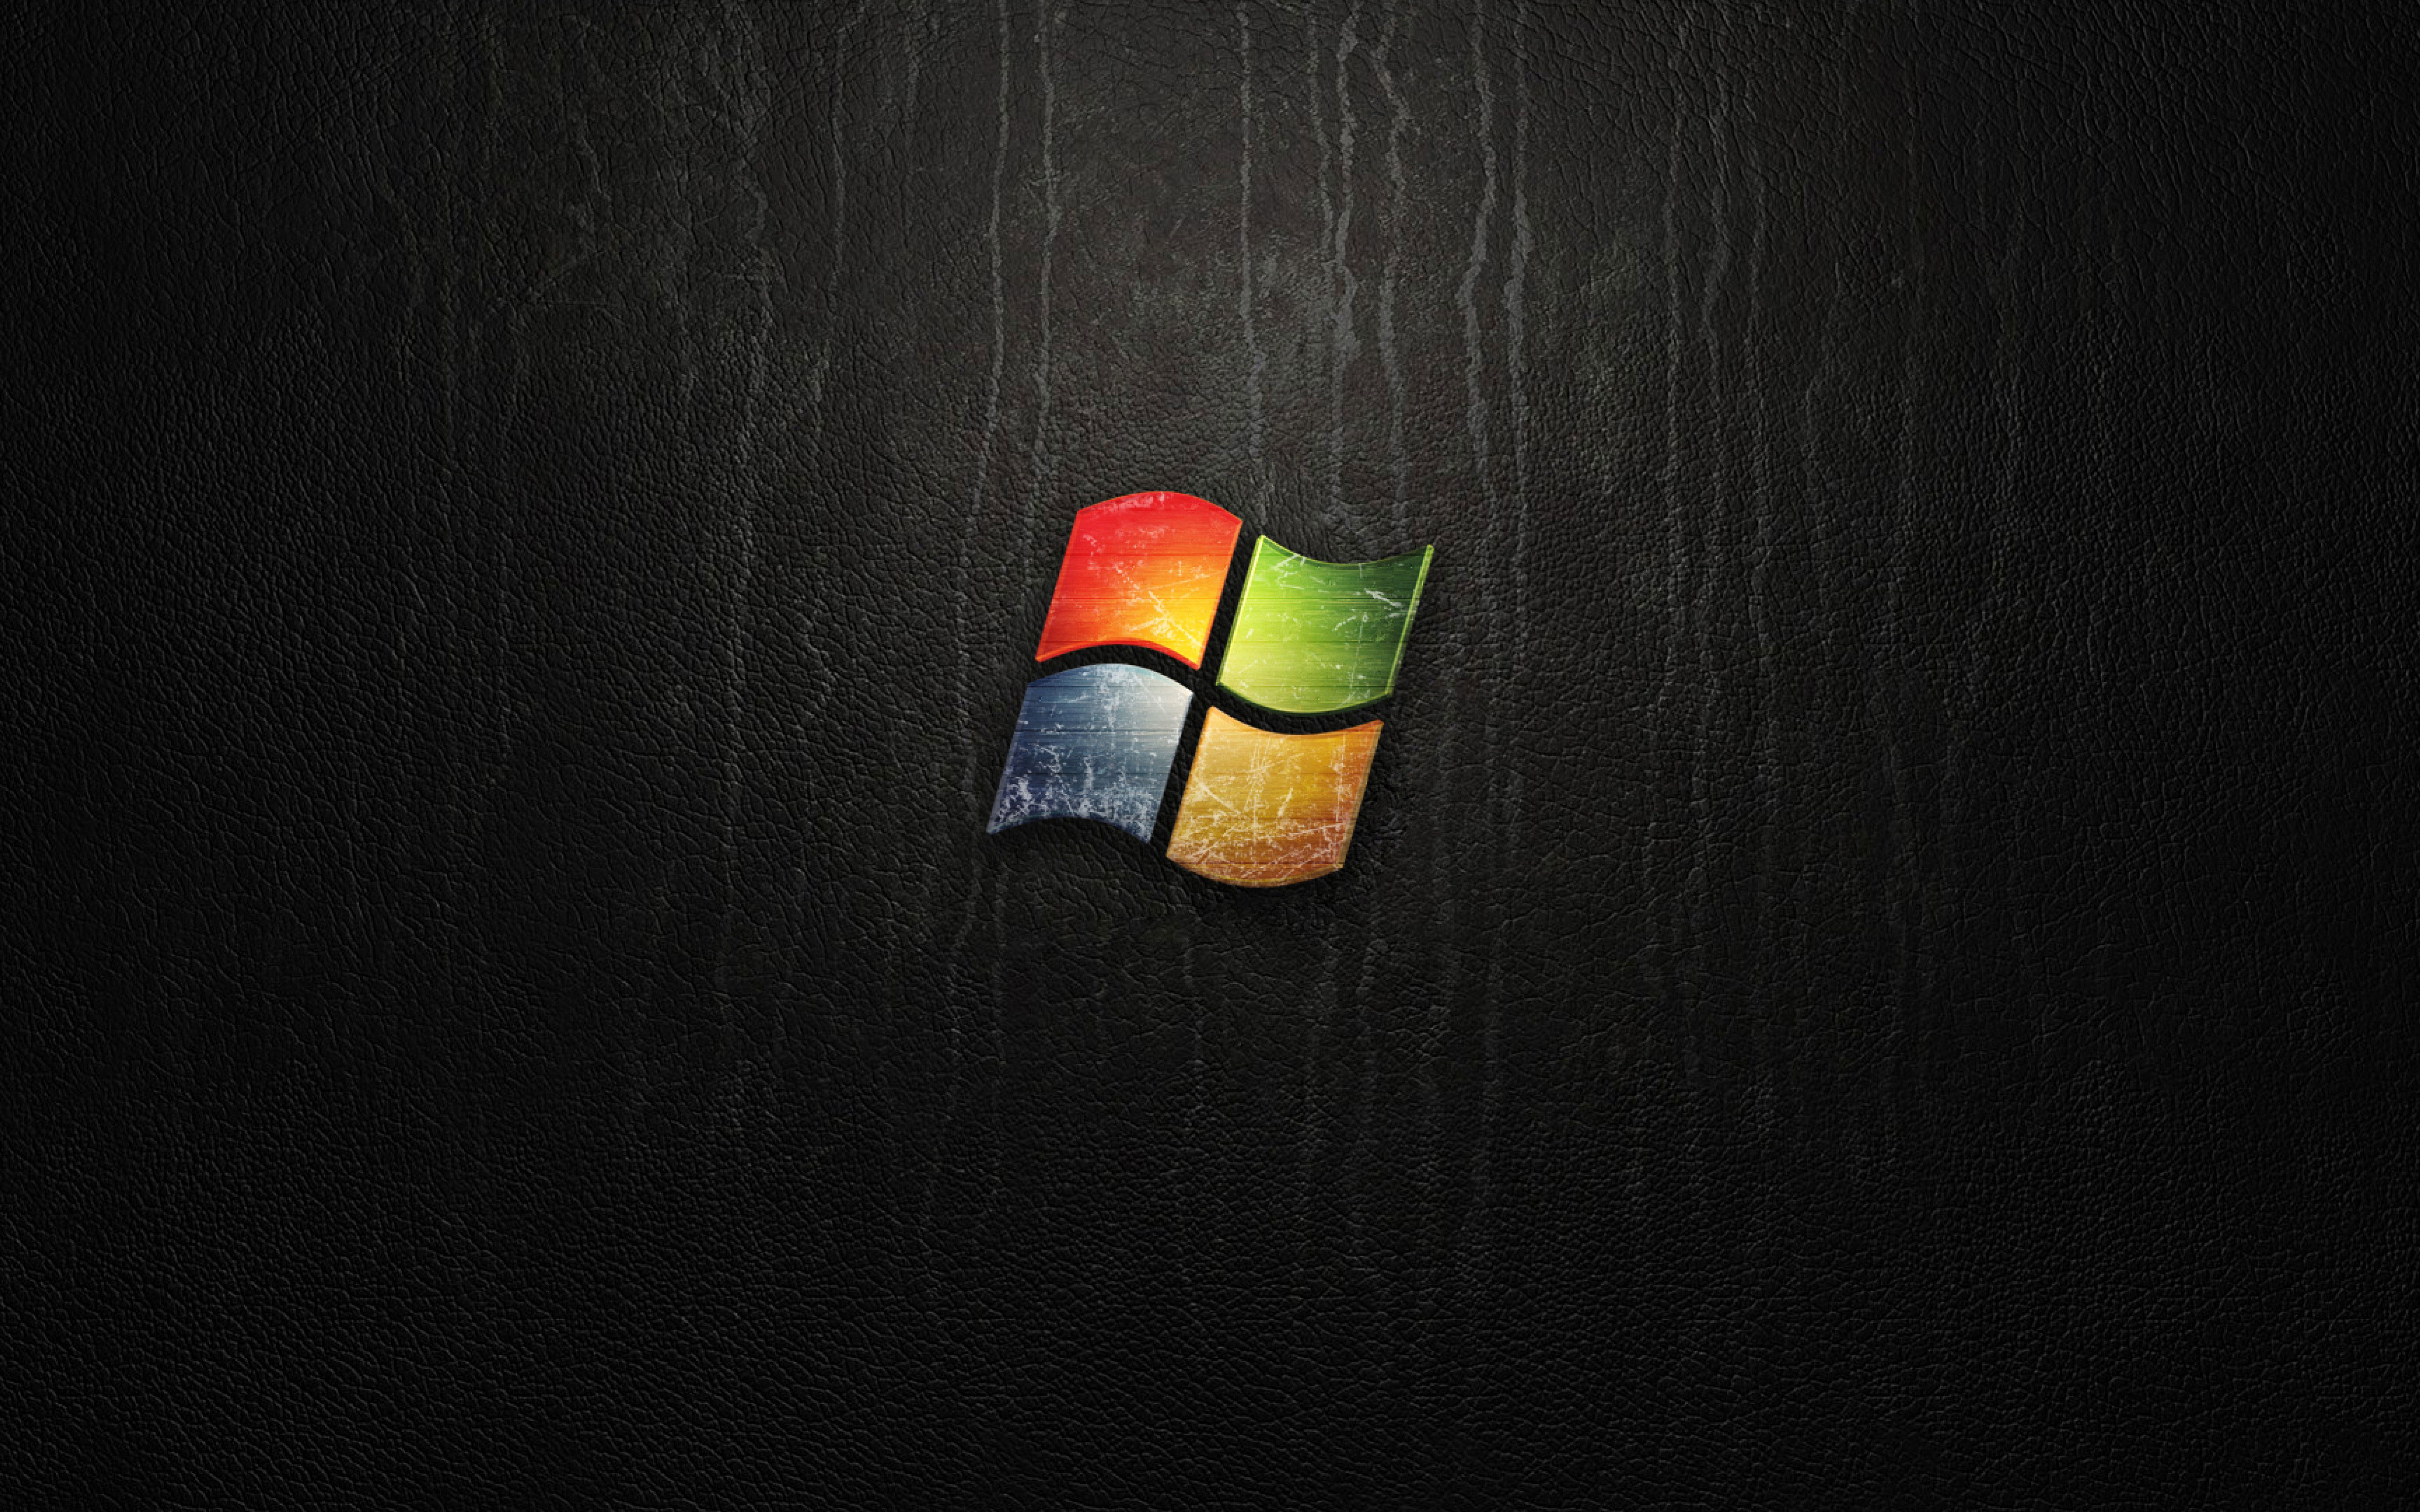 347 Windows HD Wallpapers | Backgrounds - Wallpaper Abyss - Page 6